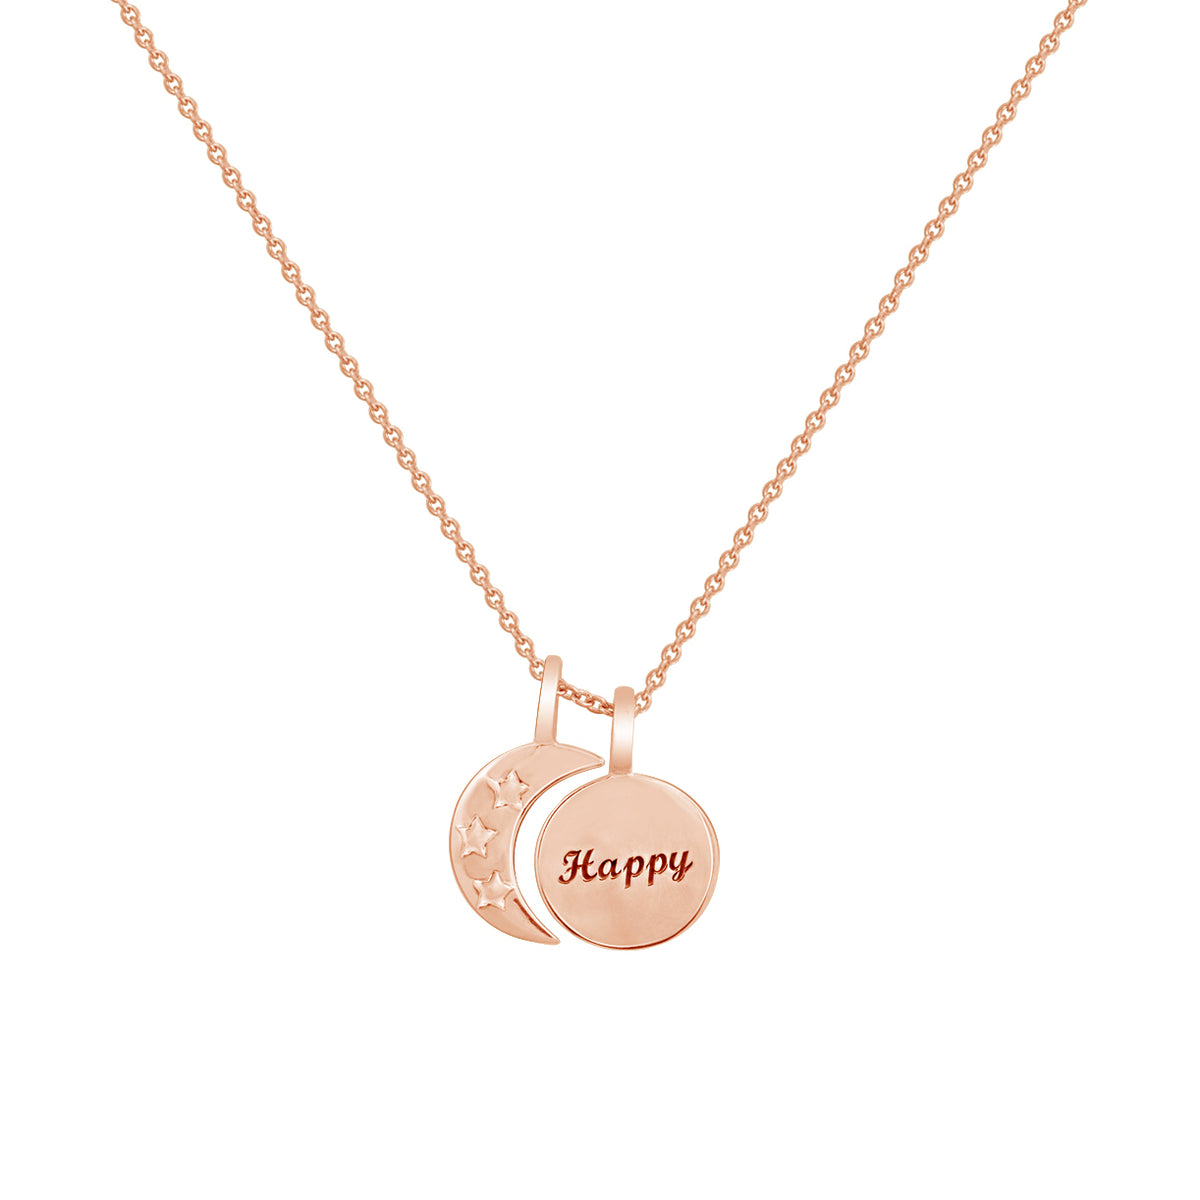 Personalized Name in Moon and Star Pendant Necklace